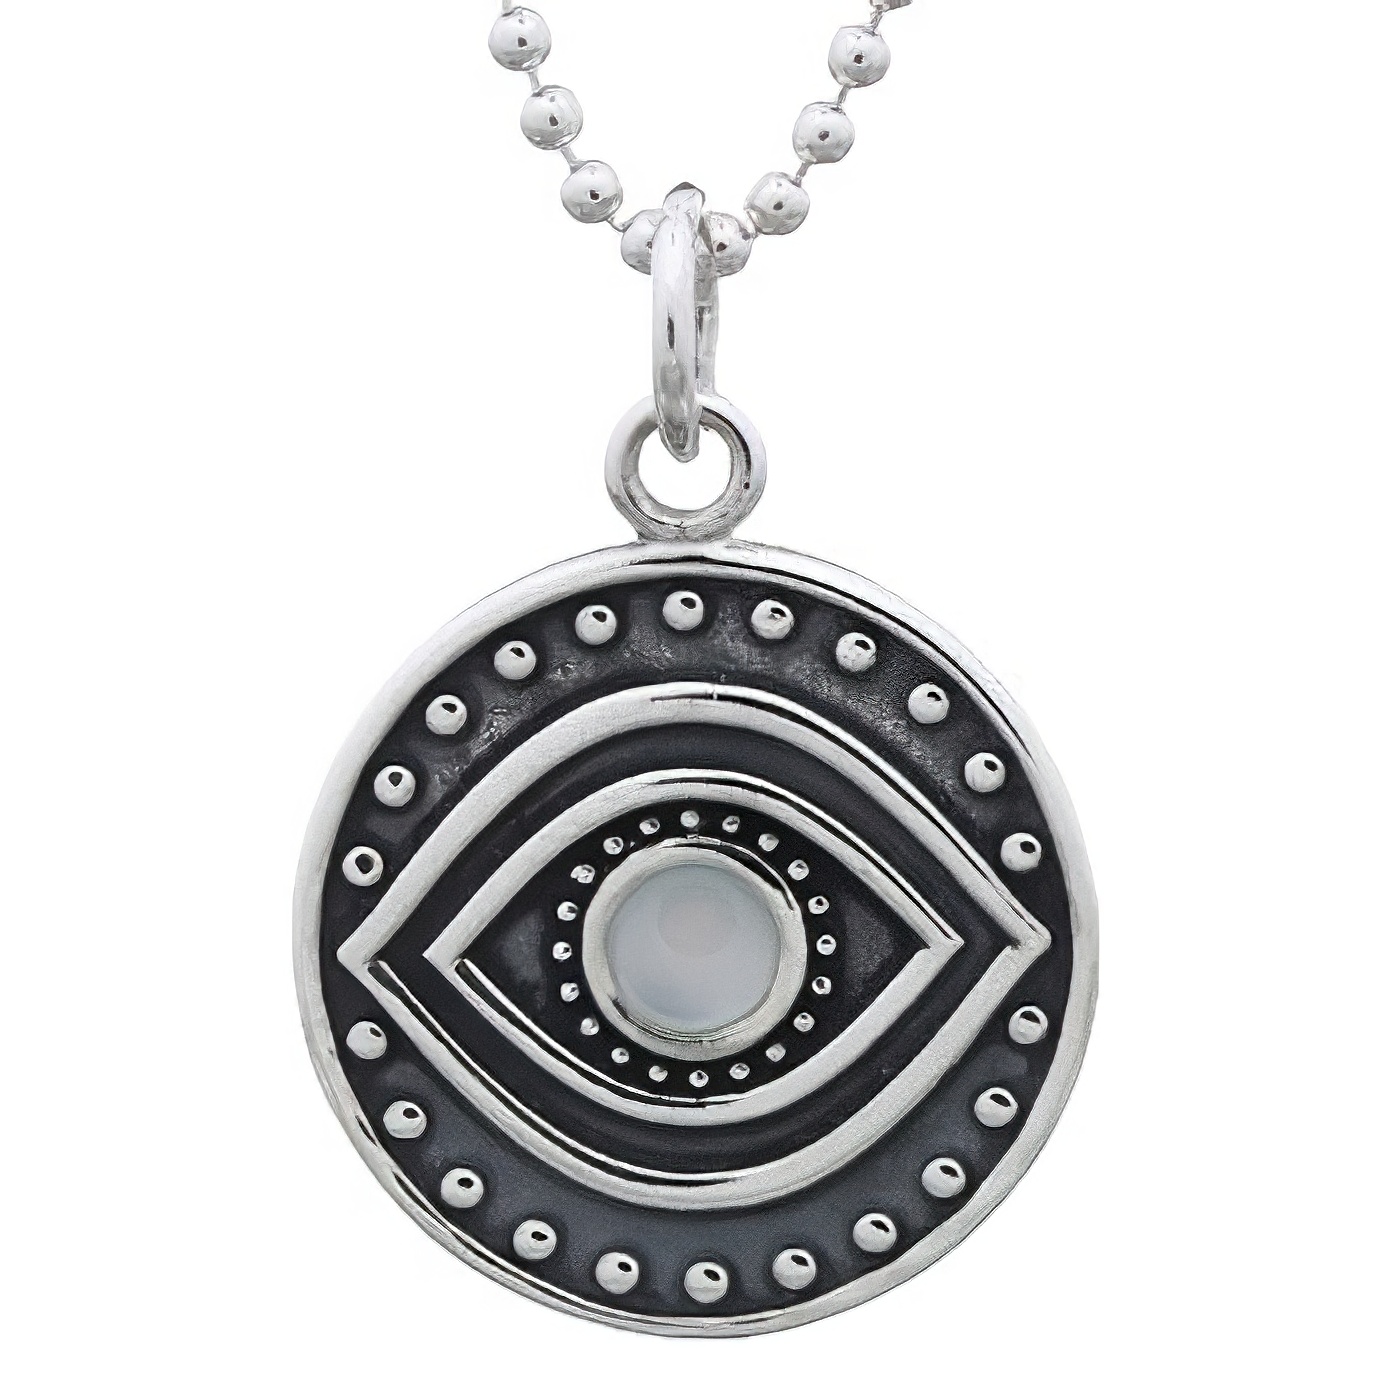 Evil Eye Tribal With Mother Of Pearl 925 Silver Disc Pendant by BeYindi 